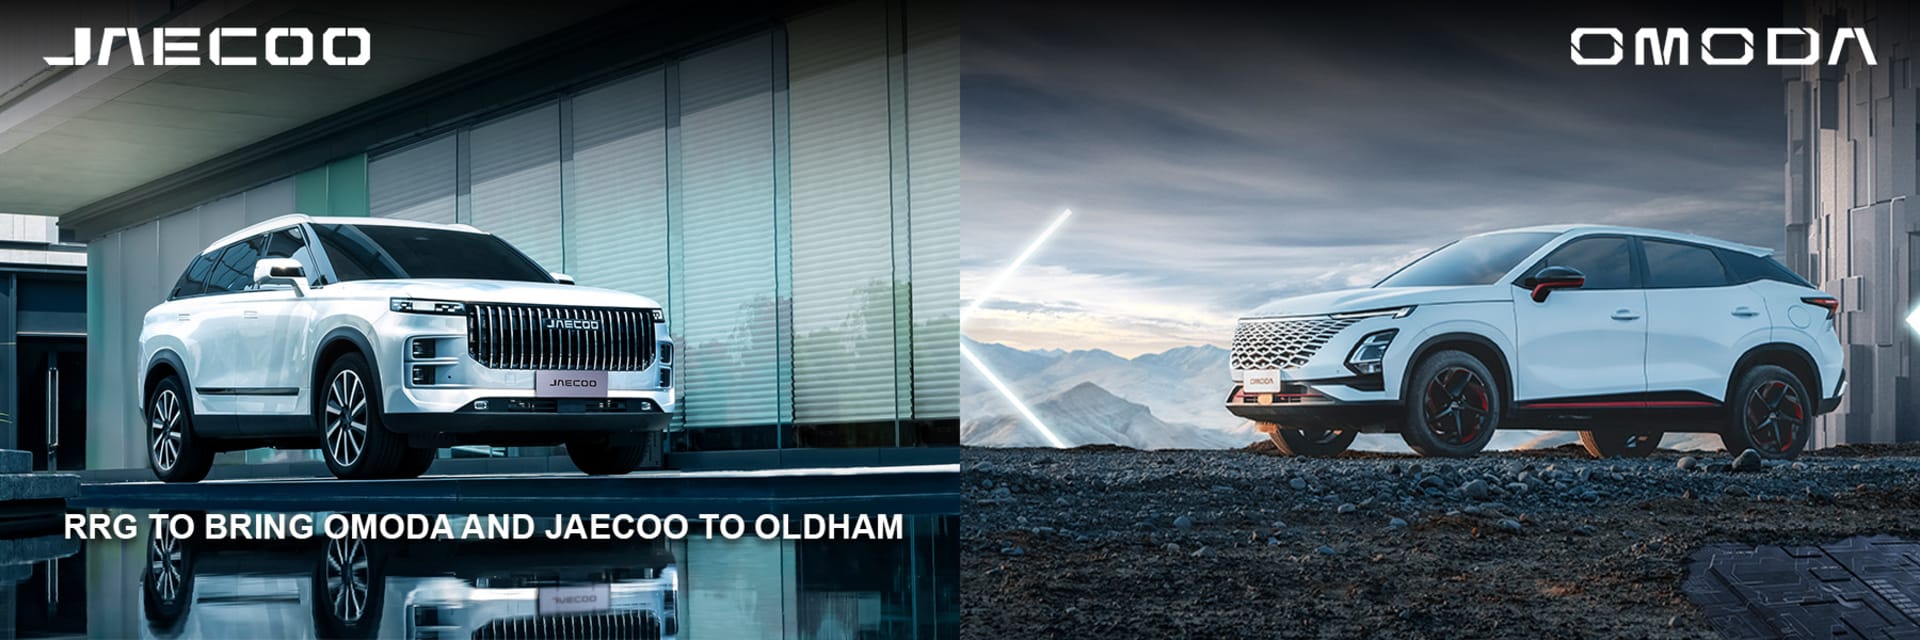 RRG to bring Omoda and Jaecoo to Oldham